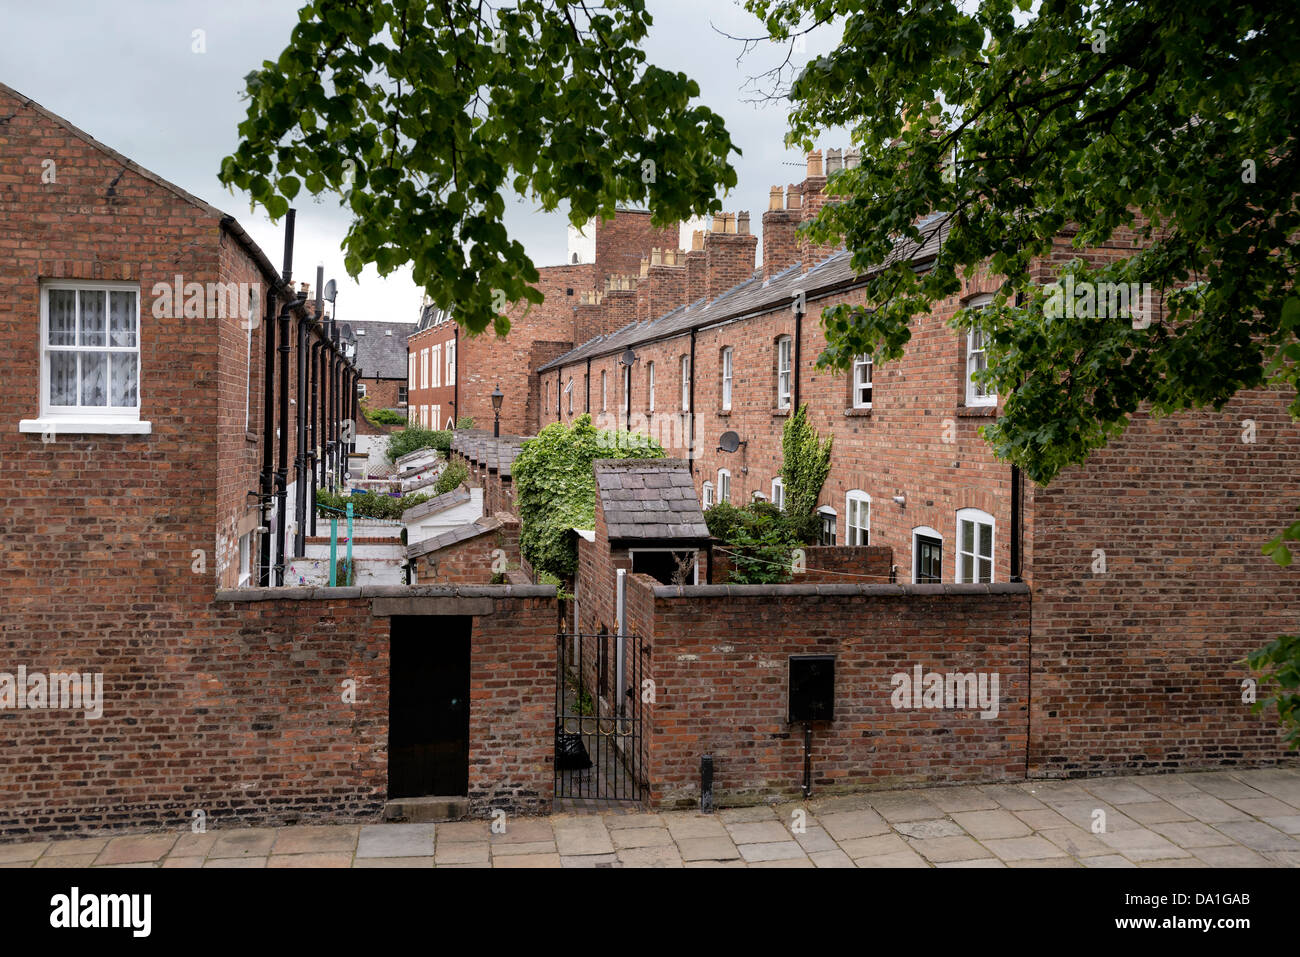 Typical northern back to back terraced housing back yards. Stock Photo